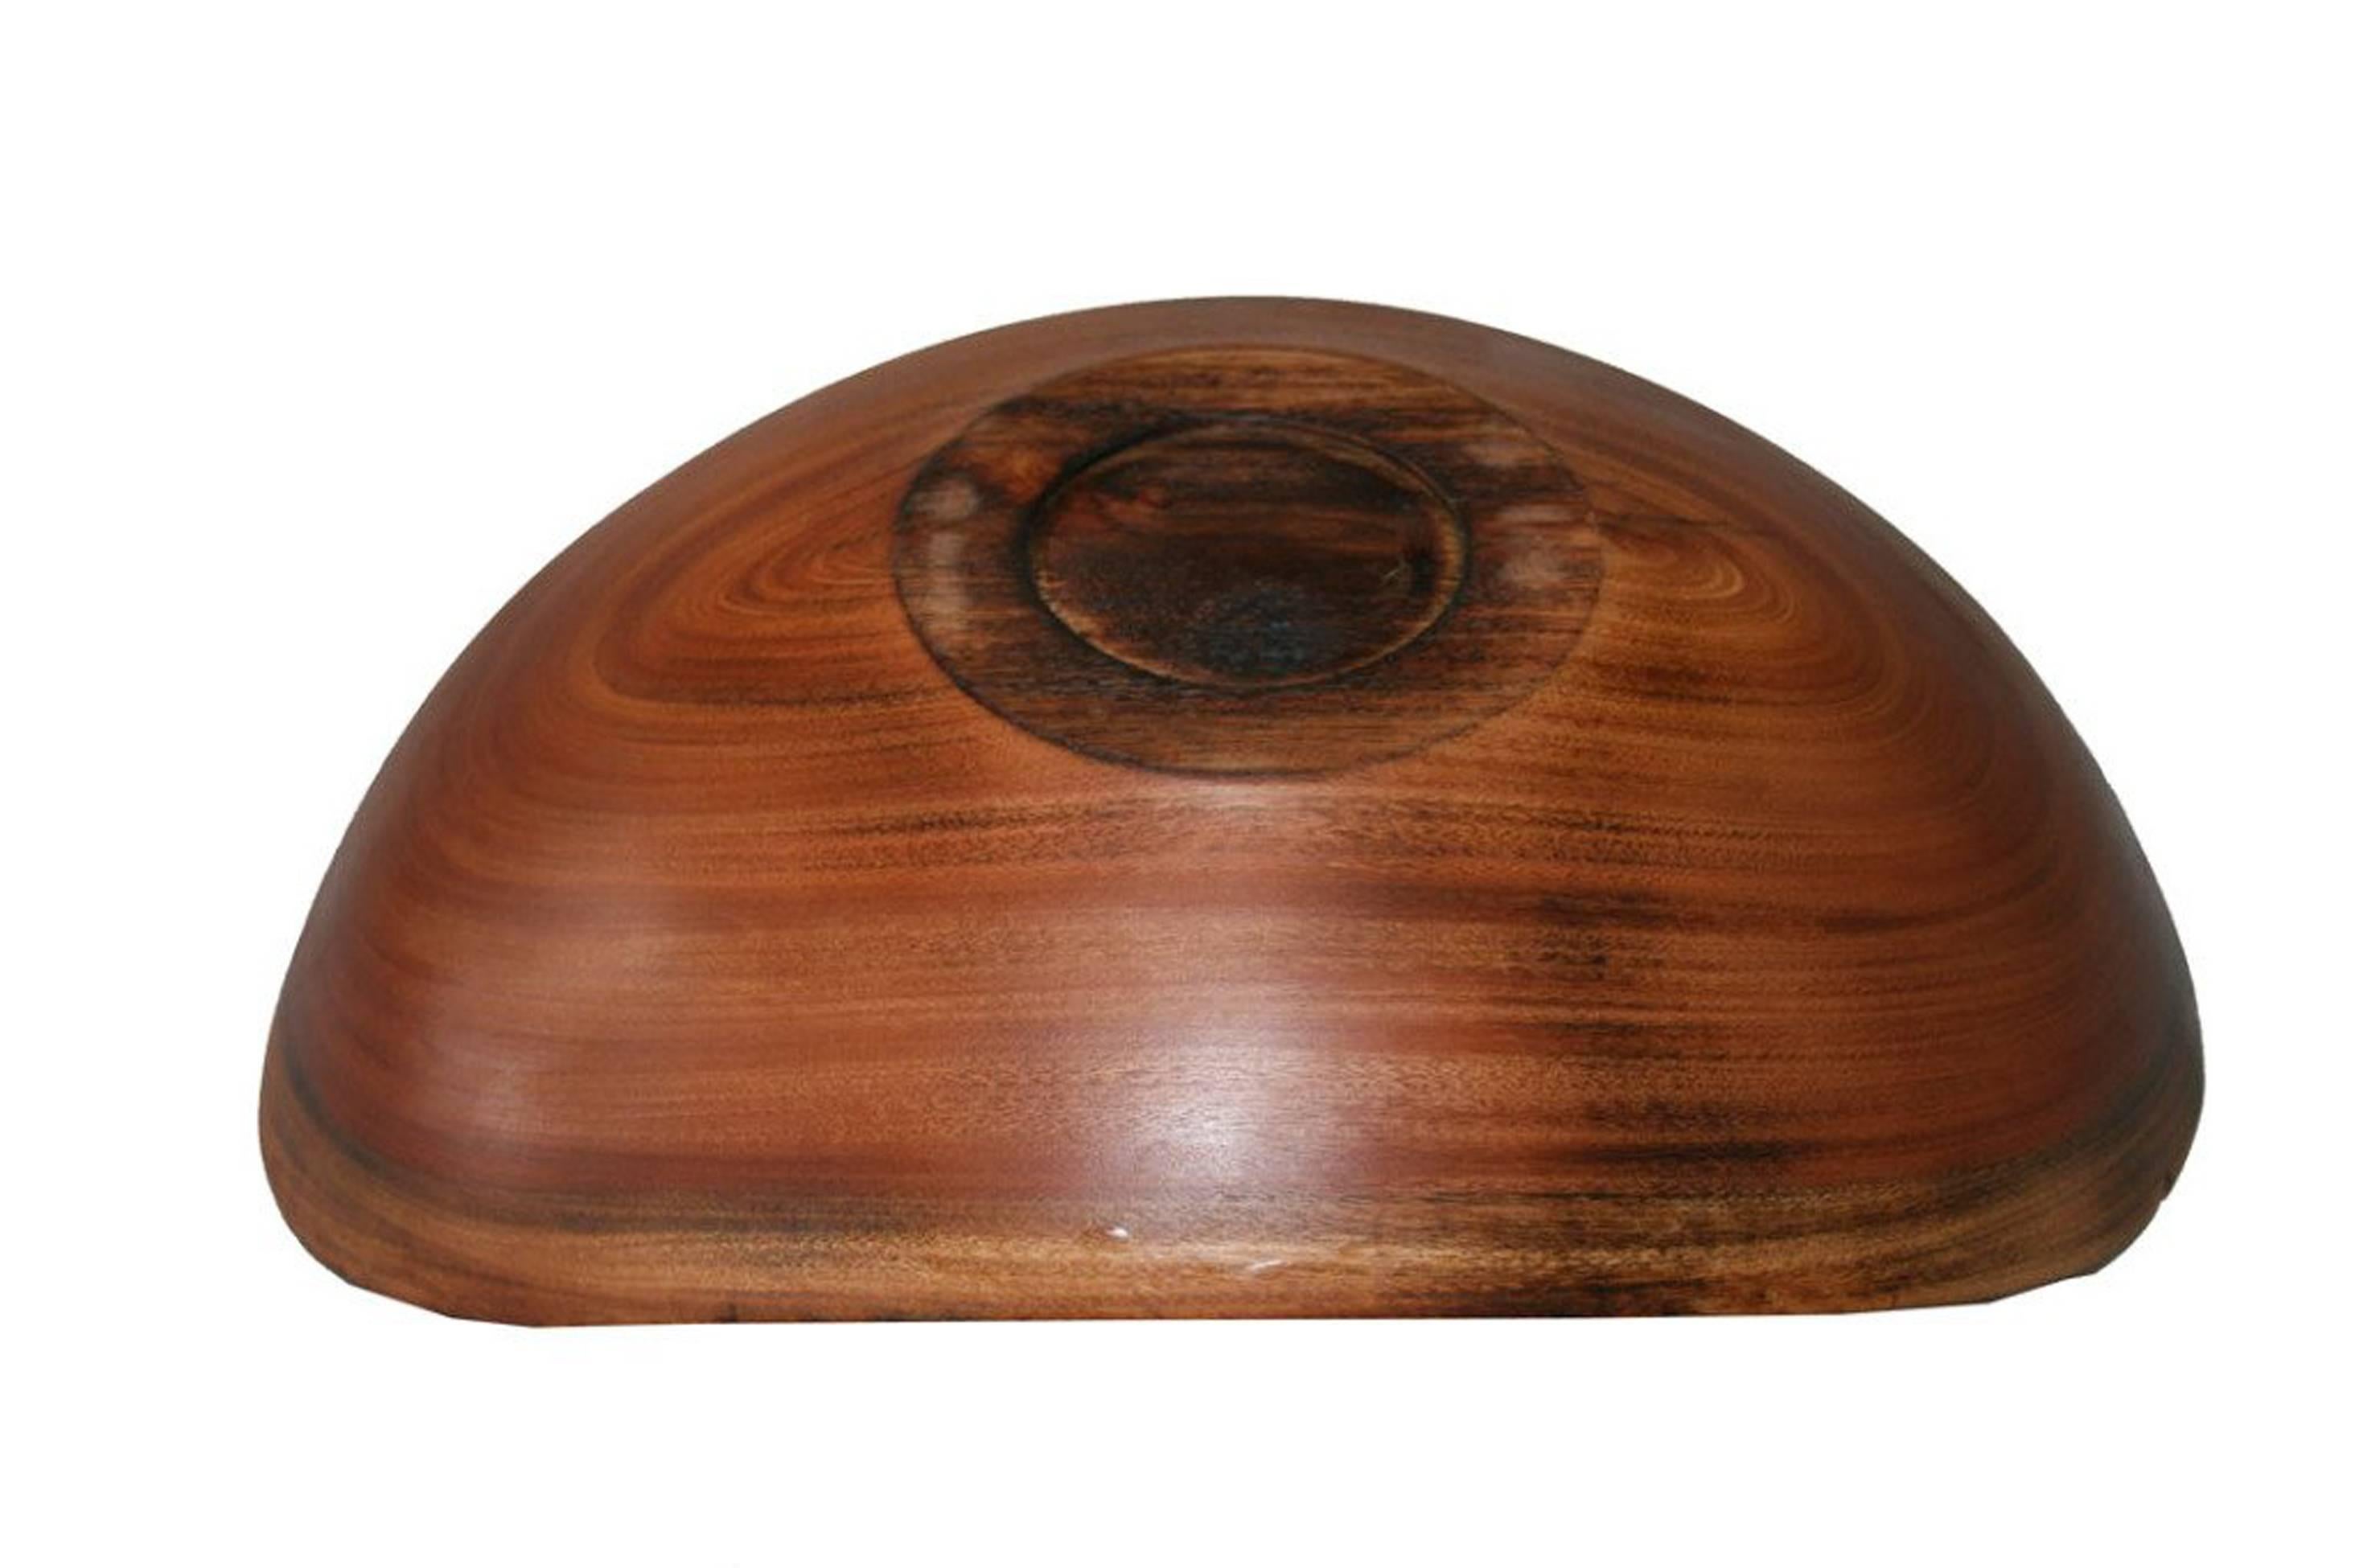 Eucalyptus wooden carved bowl by Pedro Petry, Brazil, 2006.
 